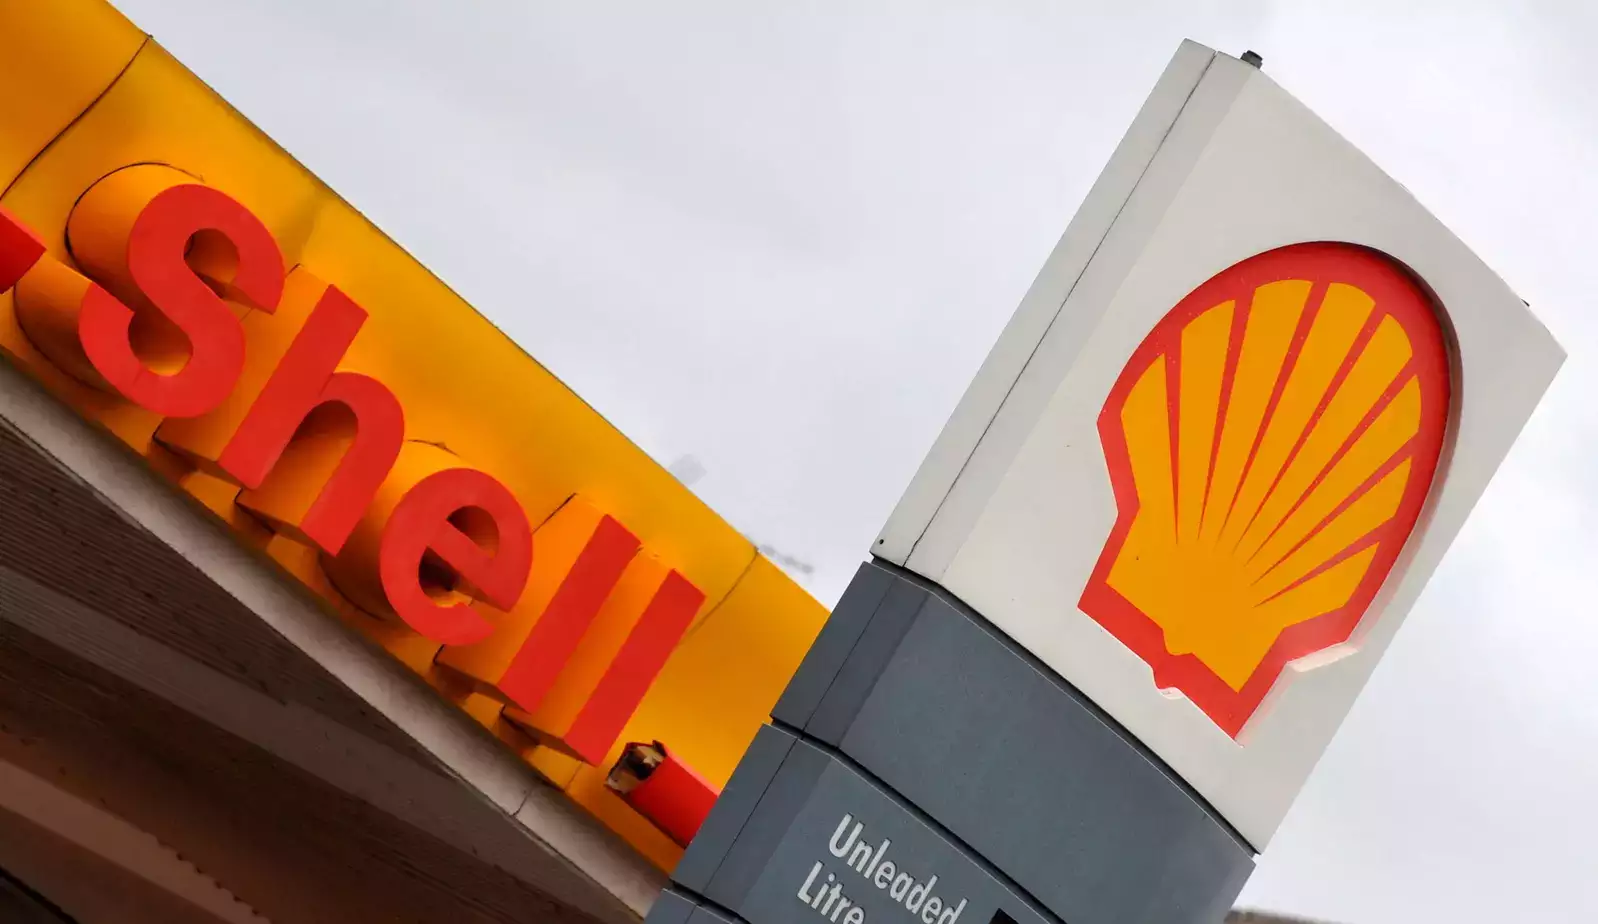 eBlue_economy_Shell completes acquisition of renewables platform Sprng Energy group